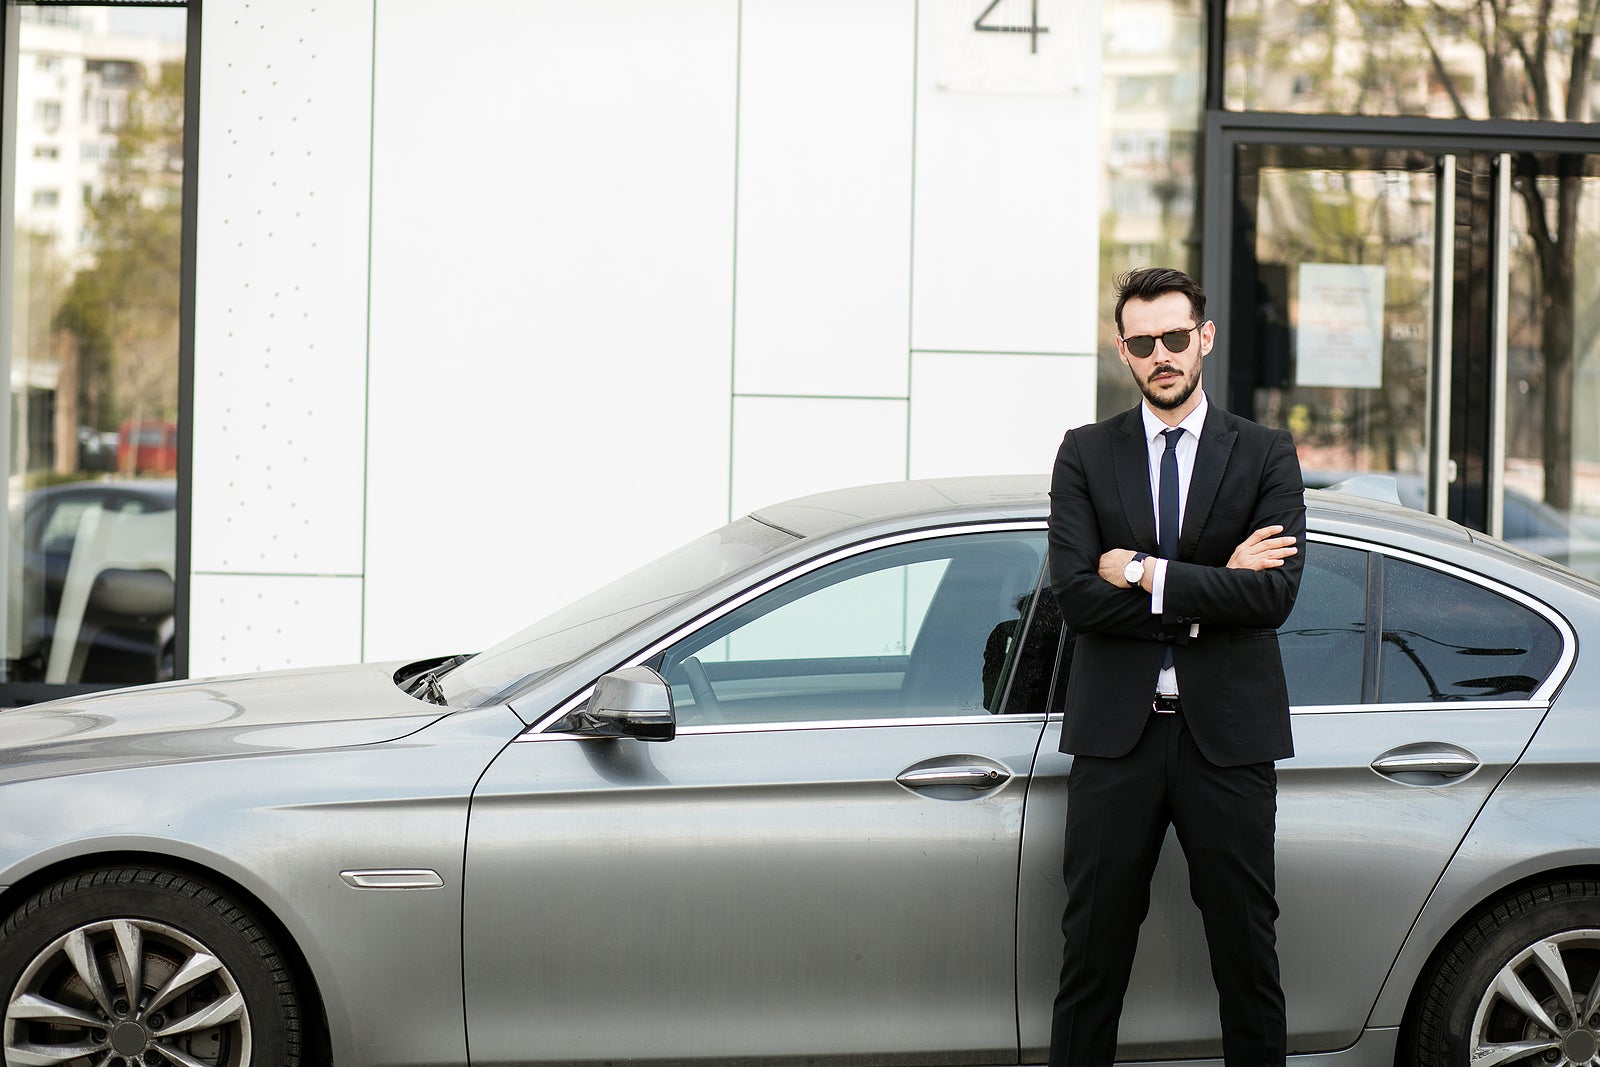 uber driver in elegant suit in front of an luxury car showing his cellphone, outside on the street in front of an office building